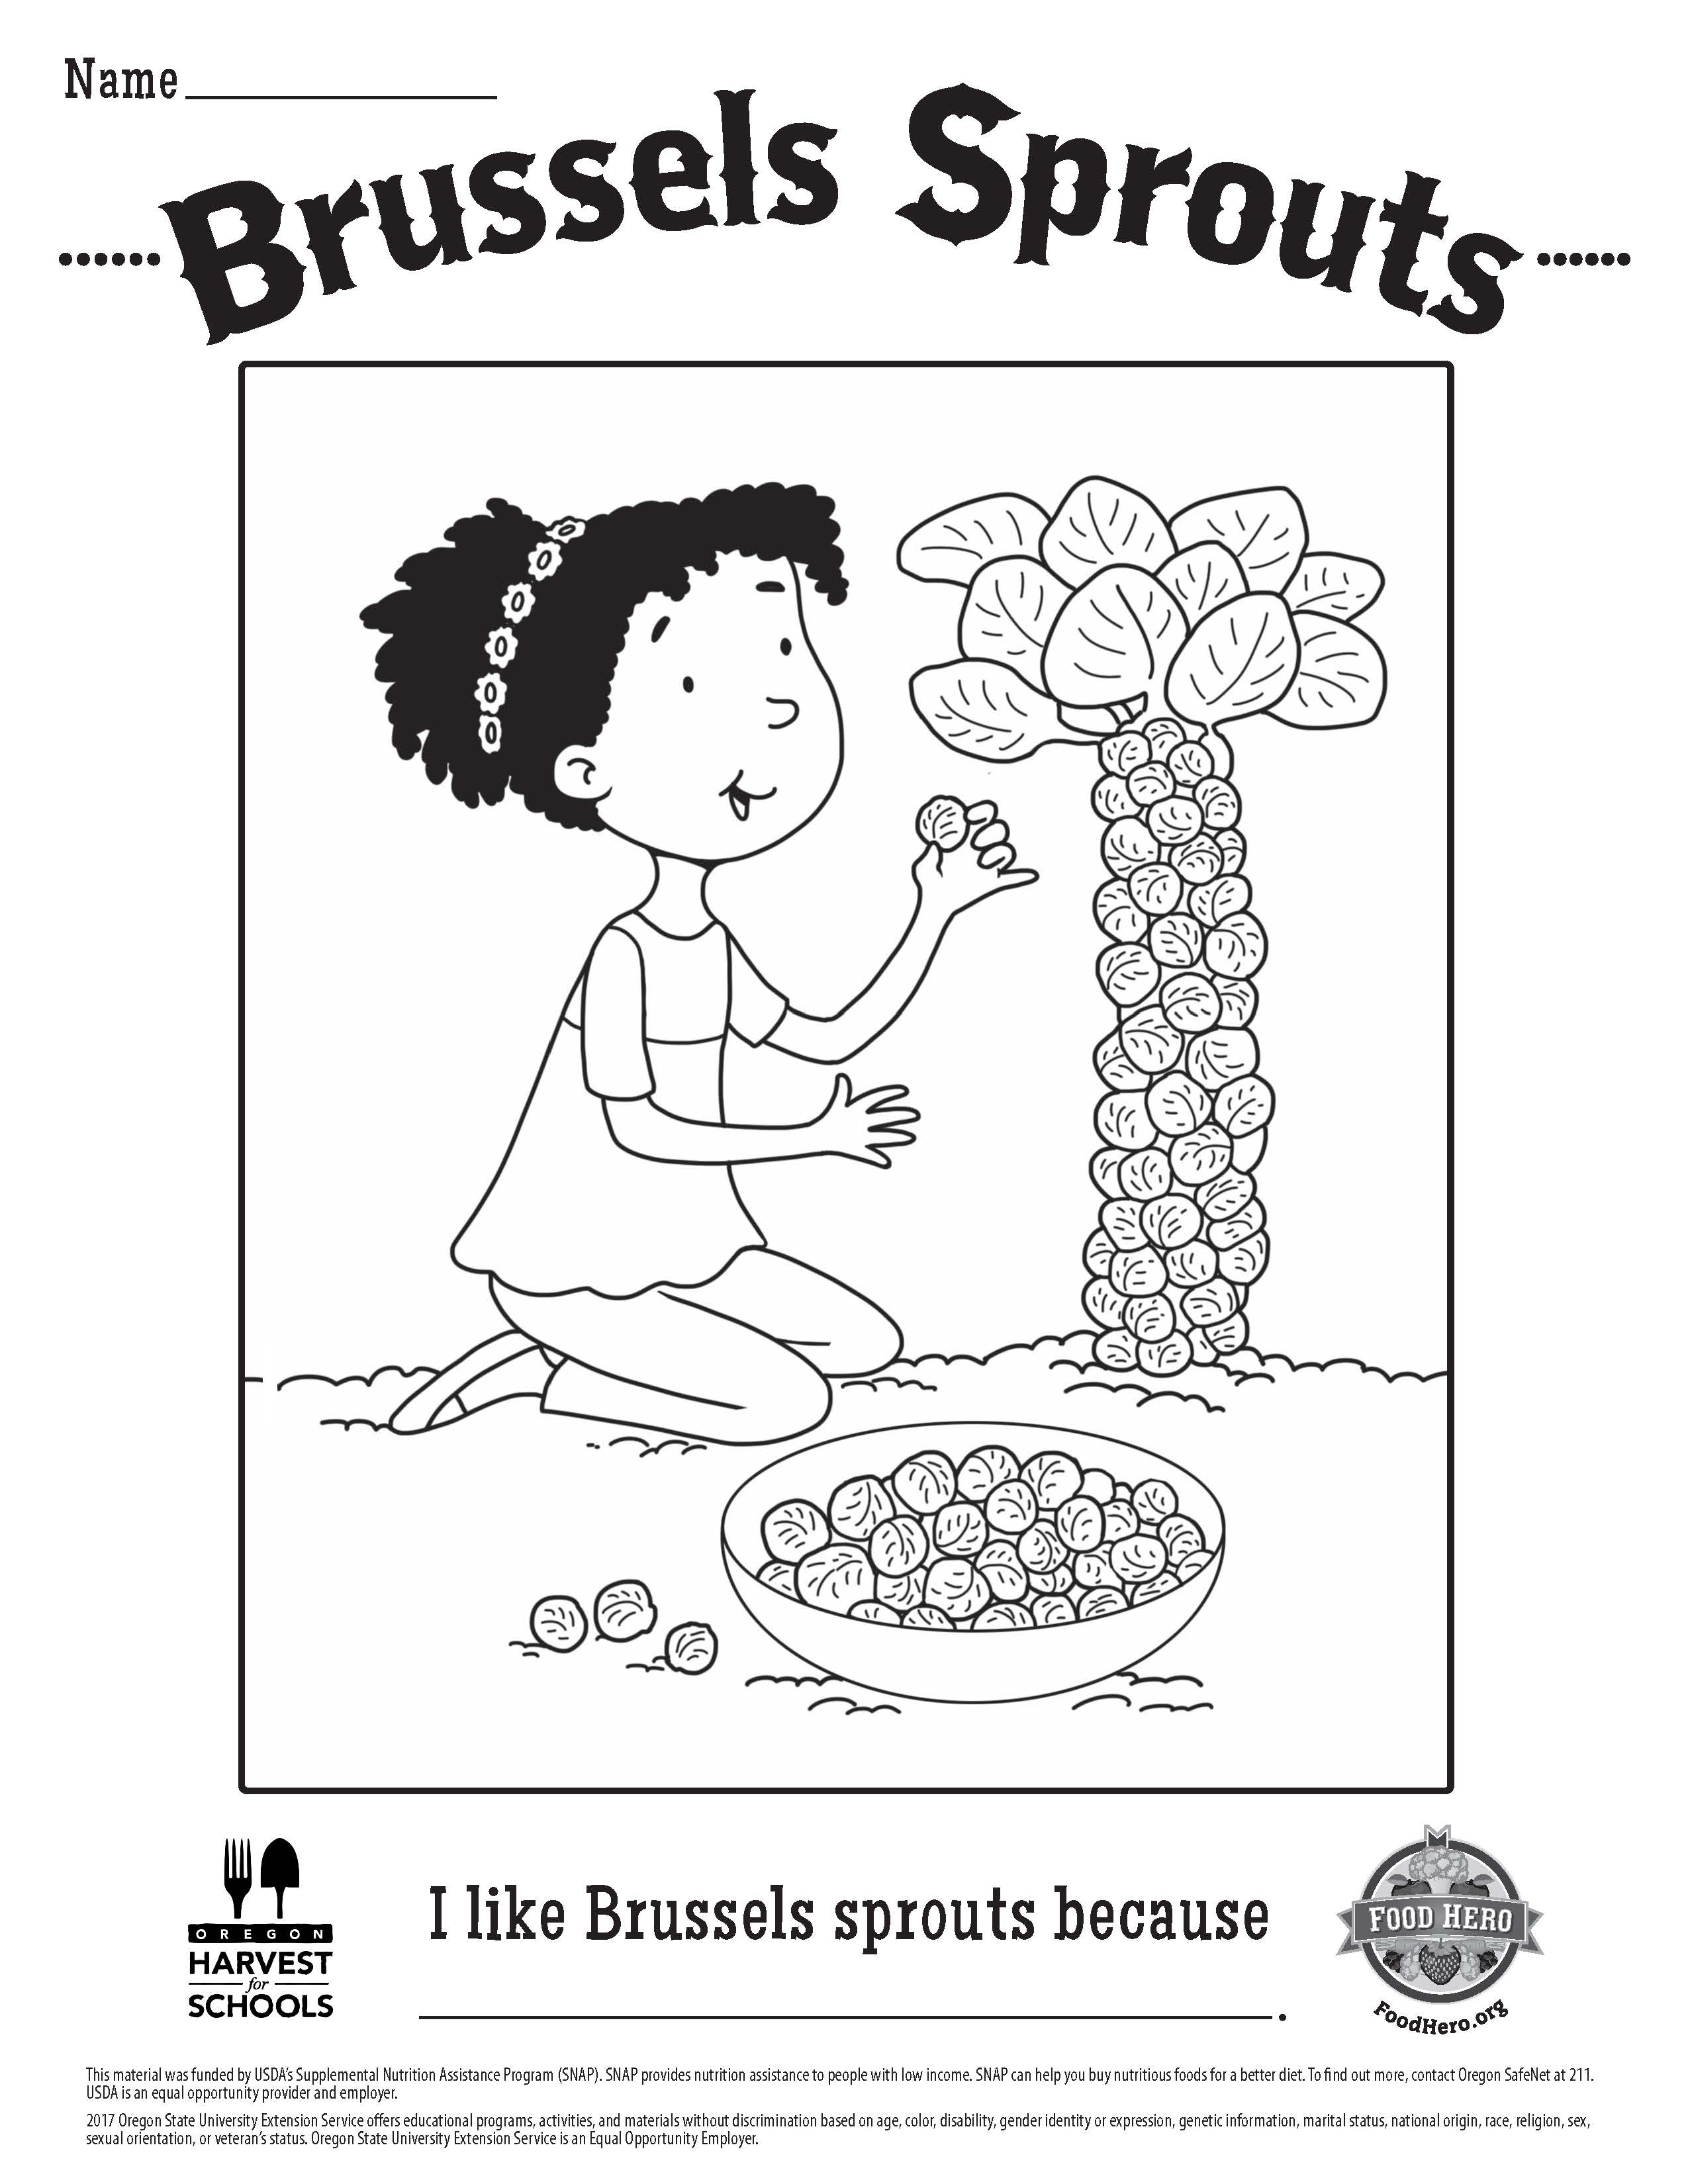 Food Hero Brussels Sprouts Coloring Sheet